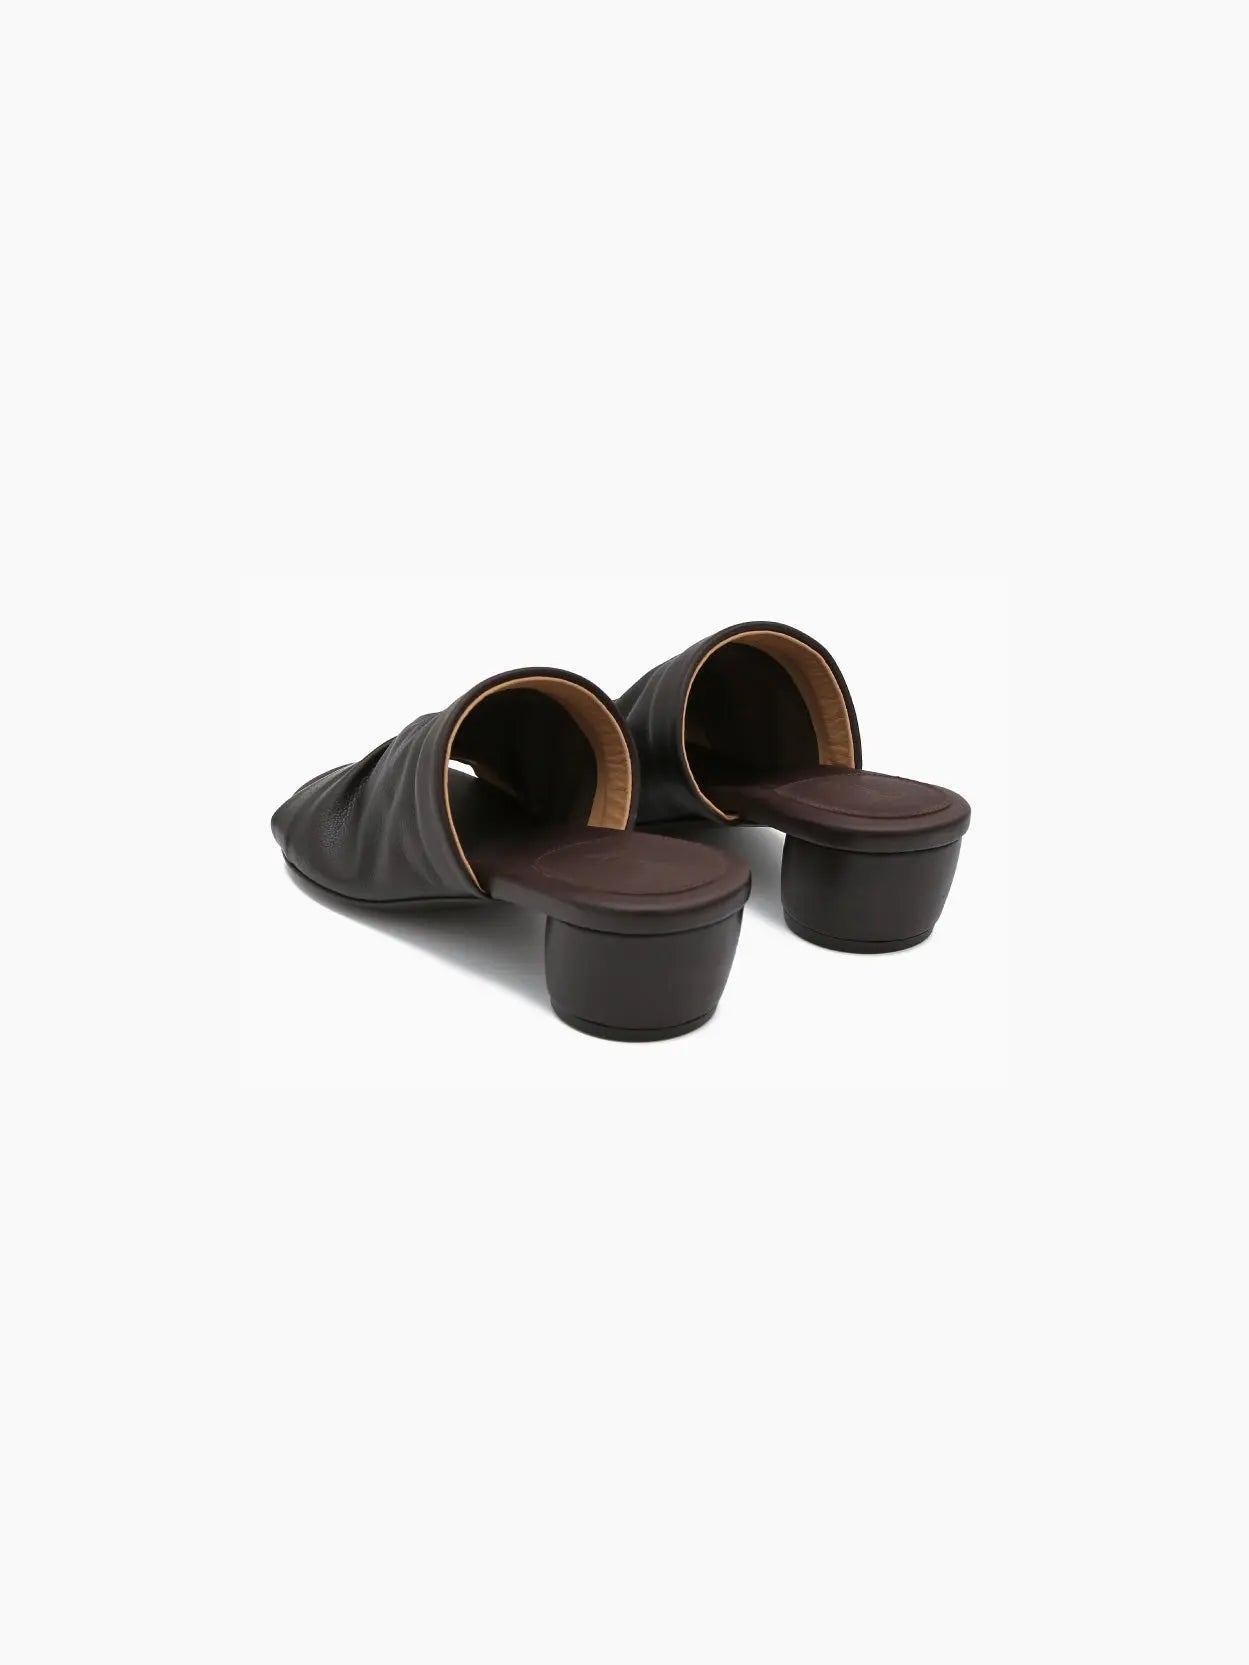 A dark brown mule-style sandal with a wide strap covering the upper foot and an open toe, available at Bassalstore. The Otto Sandal Dark Brown features a low, chunky heel and a minimalist design. Pictured against a white background in a side view, this shoe embodies chic Barcelona fashion from Marsèll.